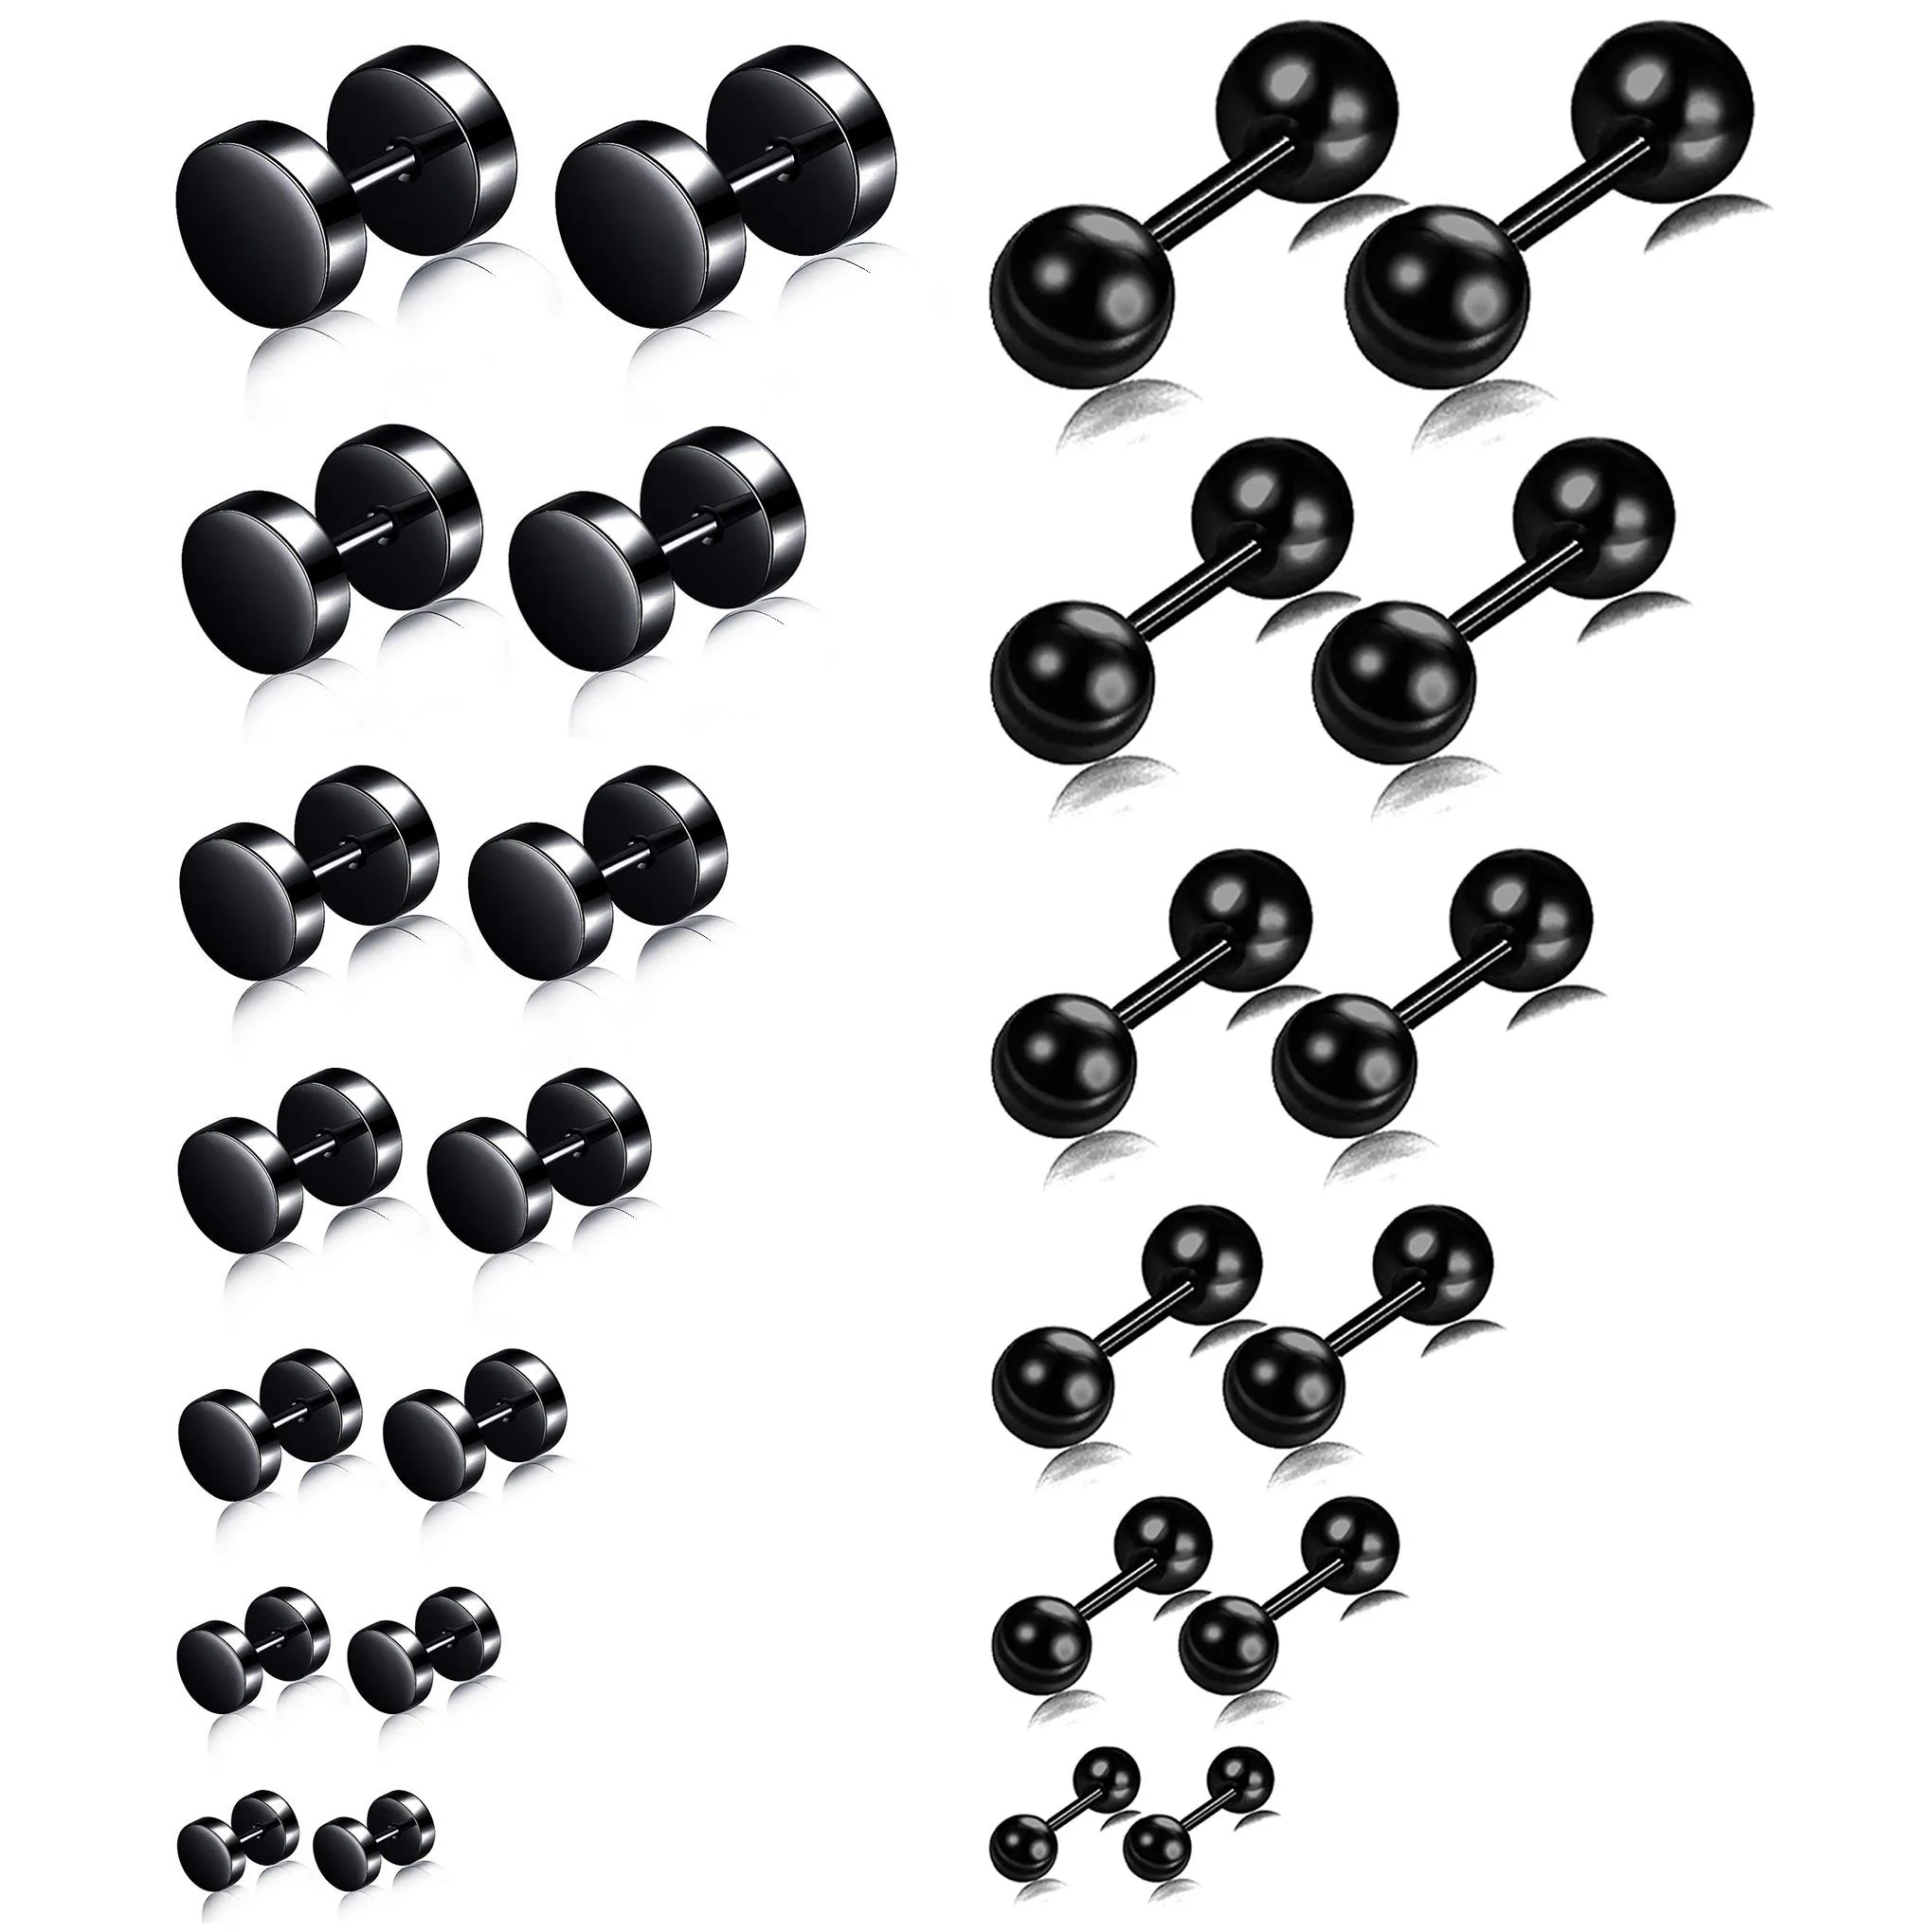 

7 Pairs Stainless Steel Ball Stud Earrings Barbell Cartilage Tragus Helix Ear Piercing For Men Women 2-8mm Silver Black